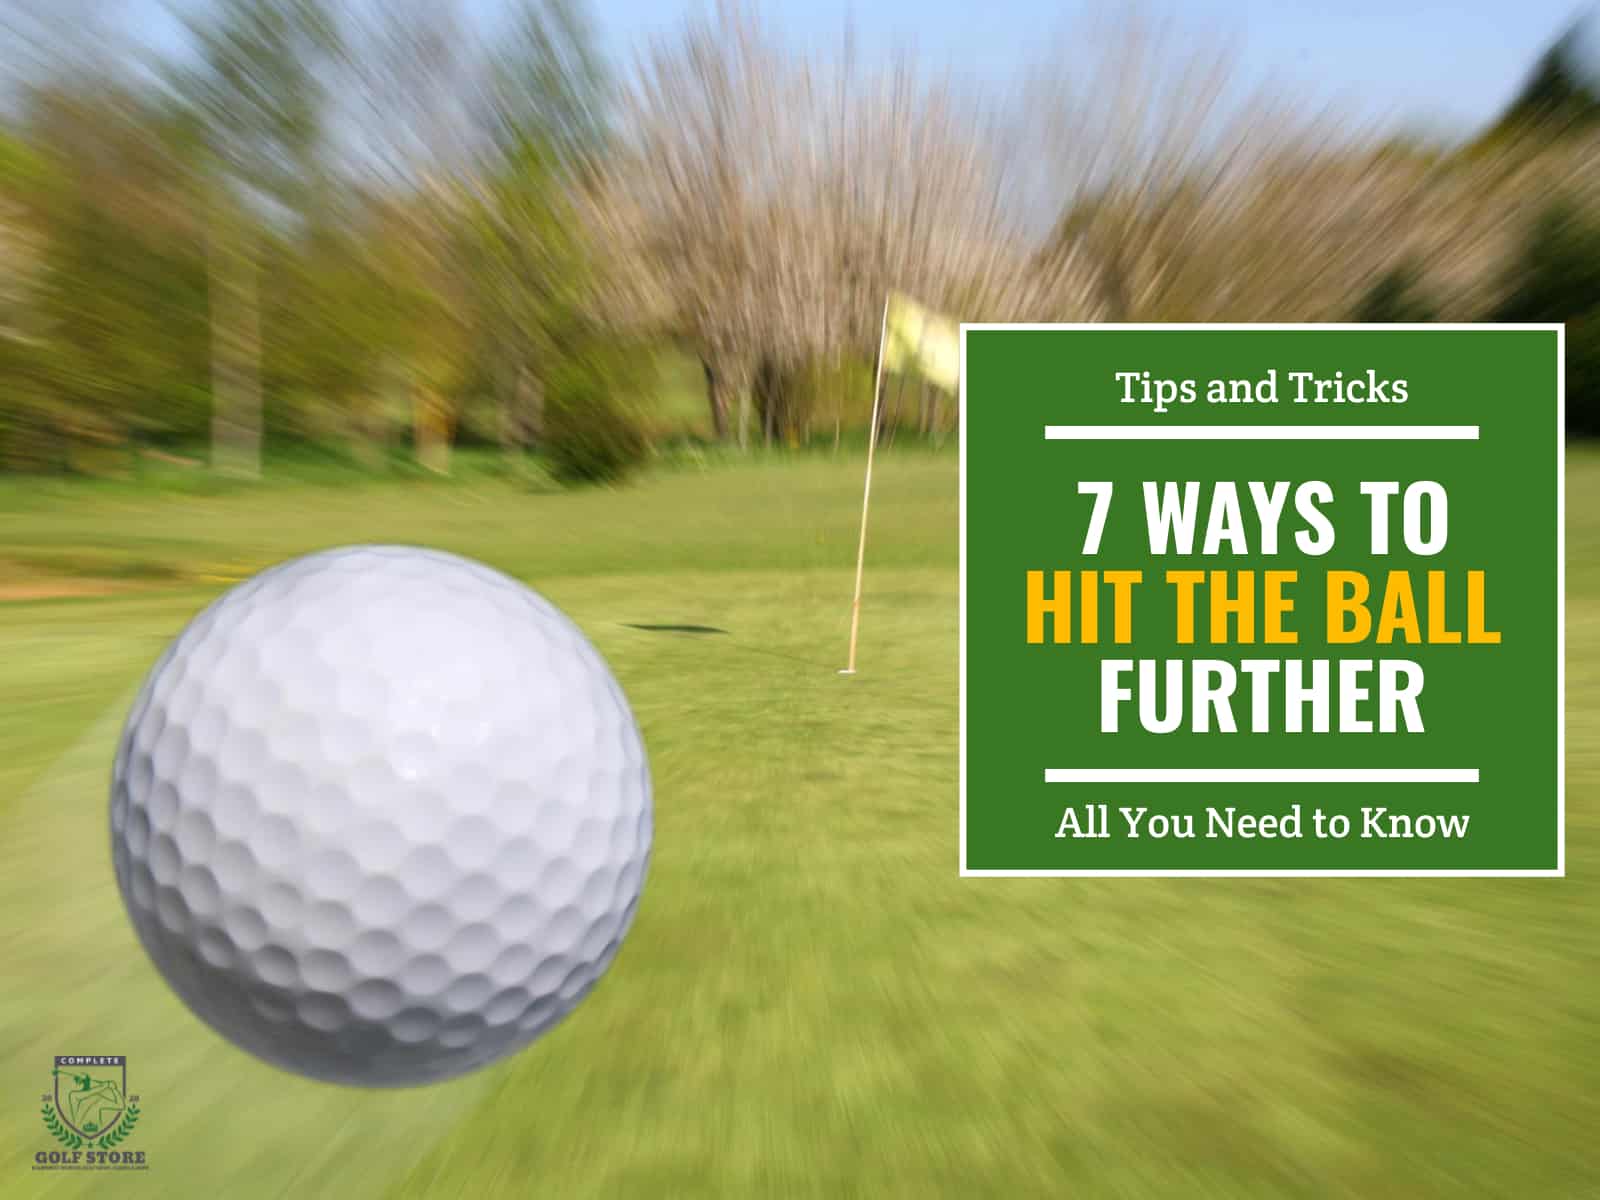 A golf ball travelling in the air towards a golf hole. Green text box on the right contains the text 